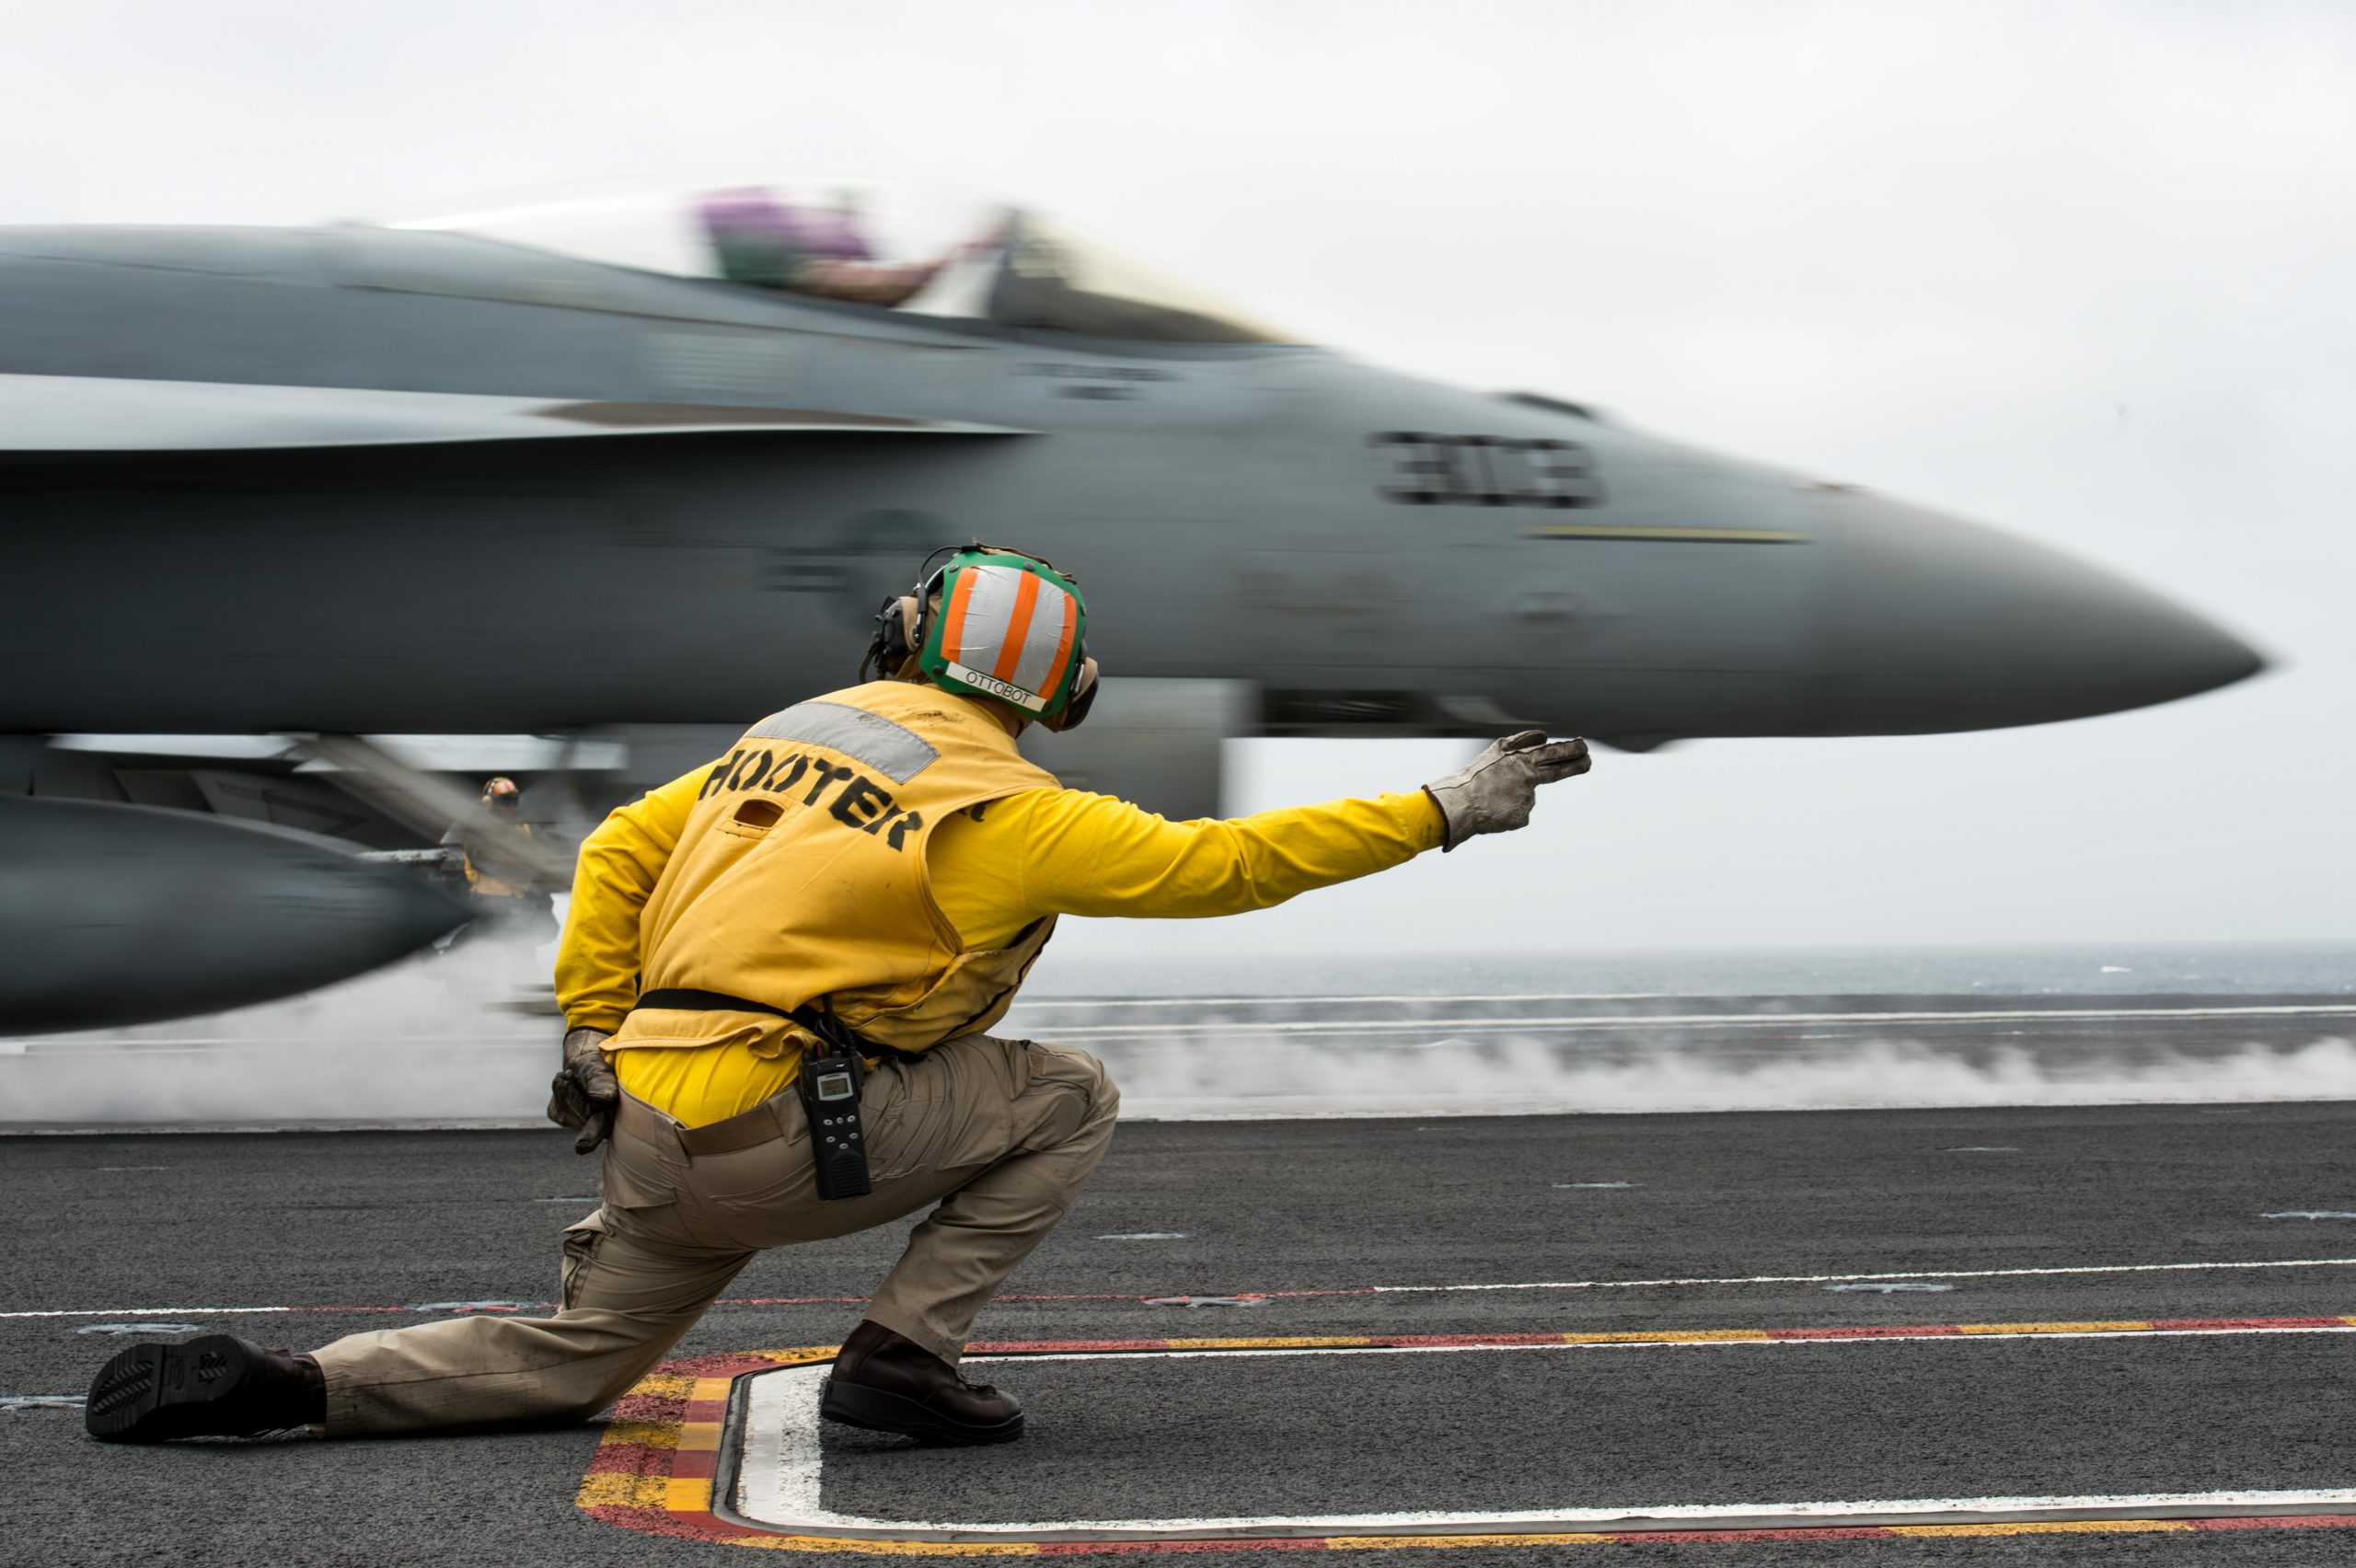 PACIFIC OCEAN (May 10, 2018) Lt. Justin Otto, from Scottsburg, Indiana, gives the signal to launch an F/A-18E Super Hornet, assigned to the "Warhawks" of Strike Fighter Squadron (VFA) 97, on the flight deck of the aircraft carrier USS John C. Stennis (CVN 74). John C. Stennis is underway with the ships and squadrons of Carrier Strike Group (CSG) 3 conducting group sail training in preparation for its next scheduled deployment. U.S. Navy photo by Lt. j.g. Jamie Moroney. -